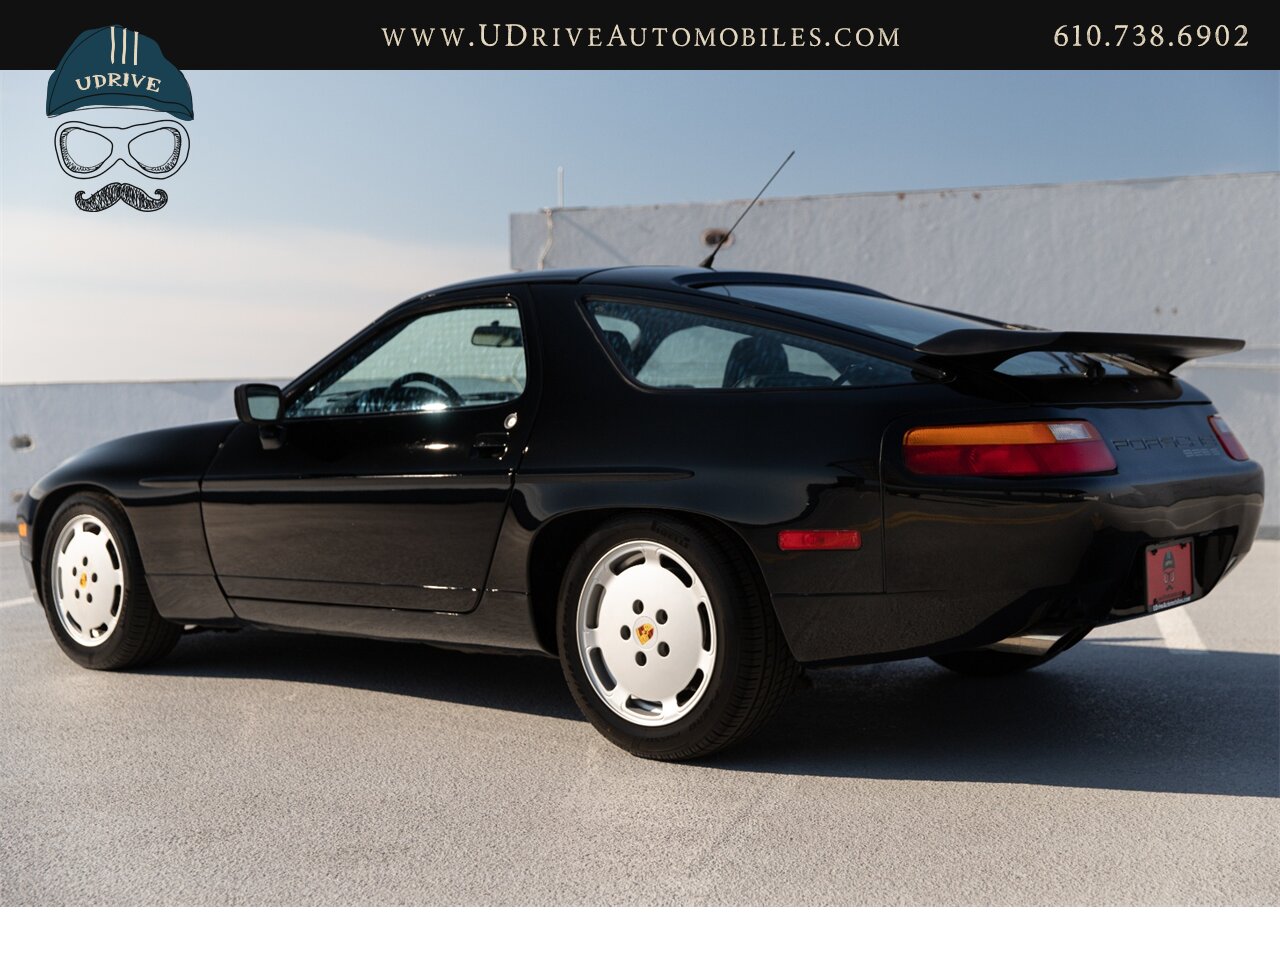 1990 Porsche 928 S4 $58k in Service History Since 2014   - Photo 24 - West Chester, PA 19382